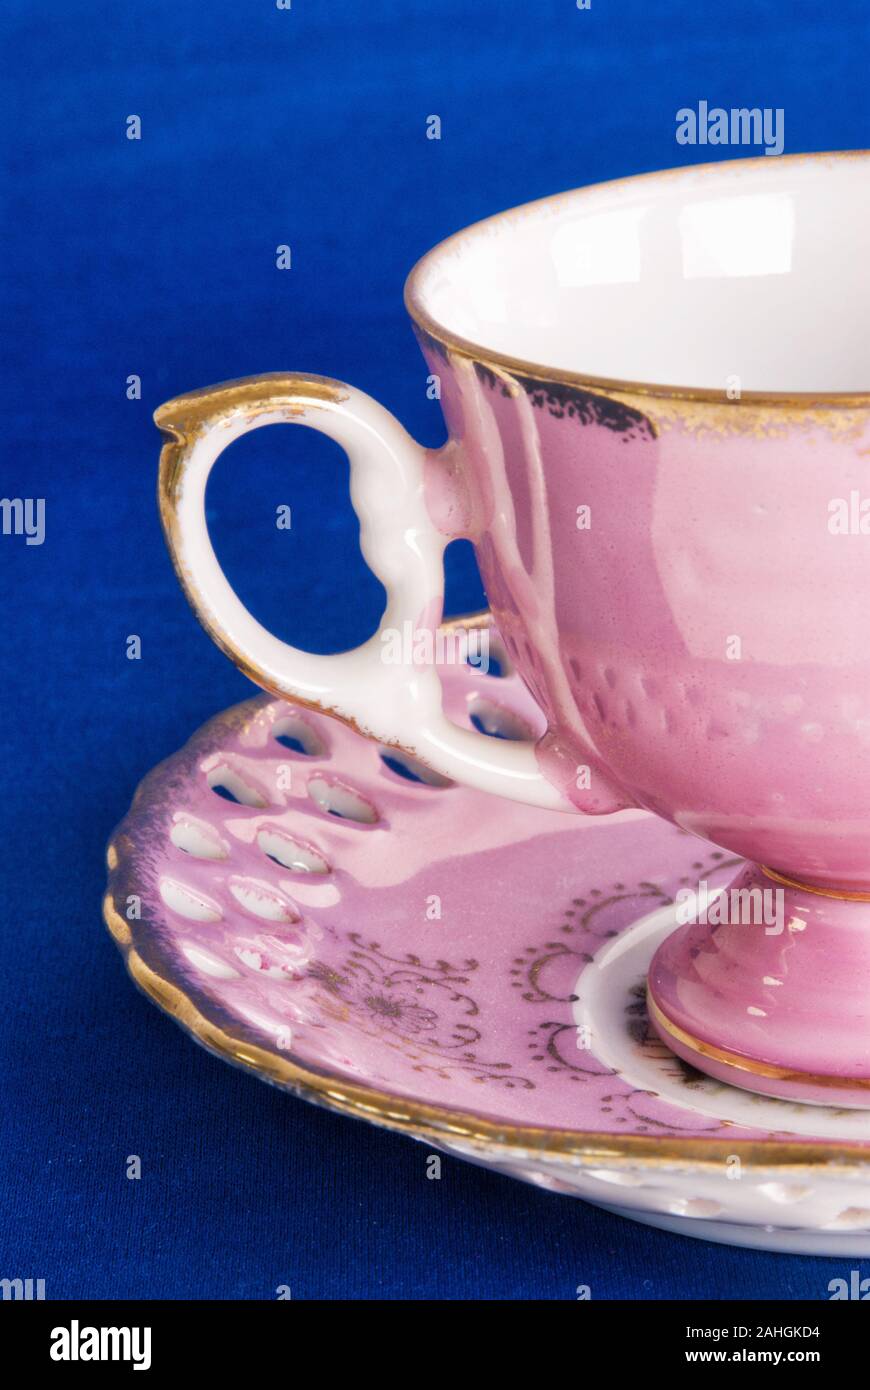 https://c8.alamy.com/comp/2AHGKD4/antique-pink-colored-cup-with-matching-saucer-on-a-blue-textured-background-2AHGKD4.jpg